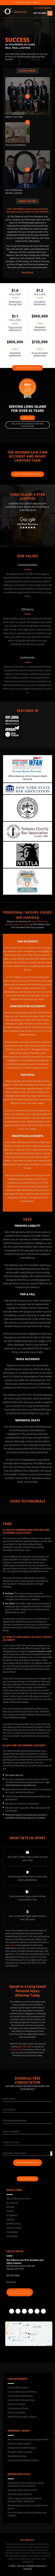 The Odierno Law Firm, P.C. - Melville NY Lawyers